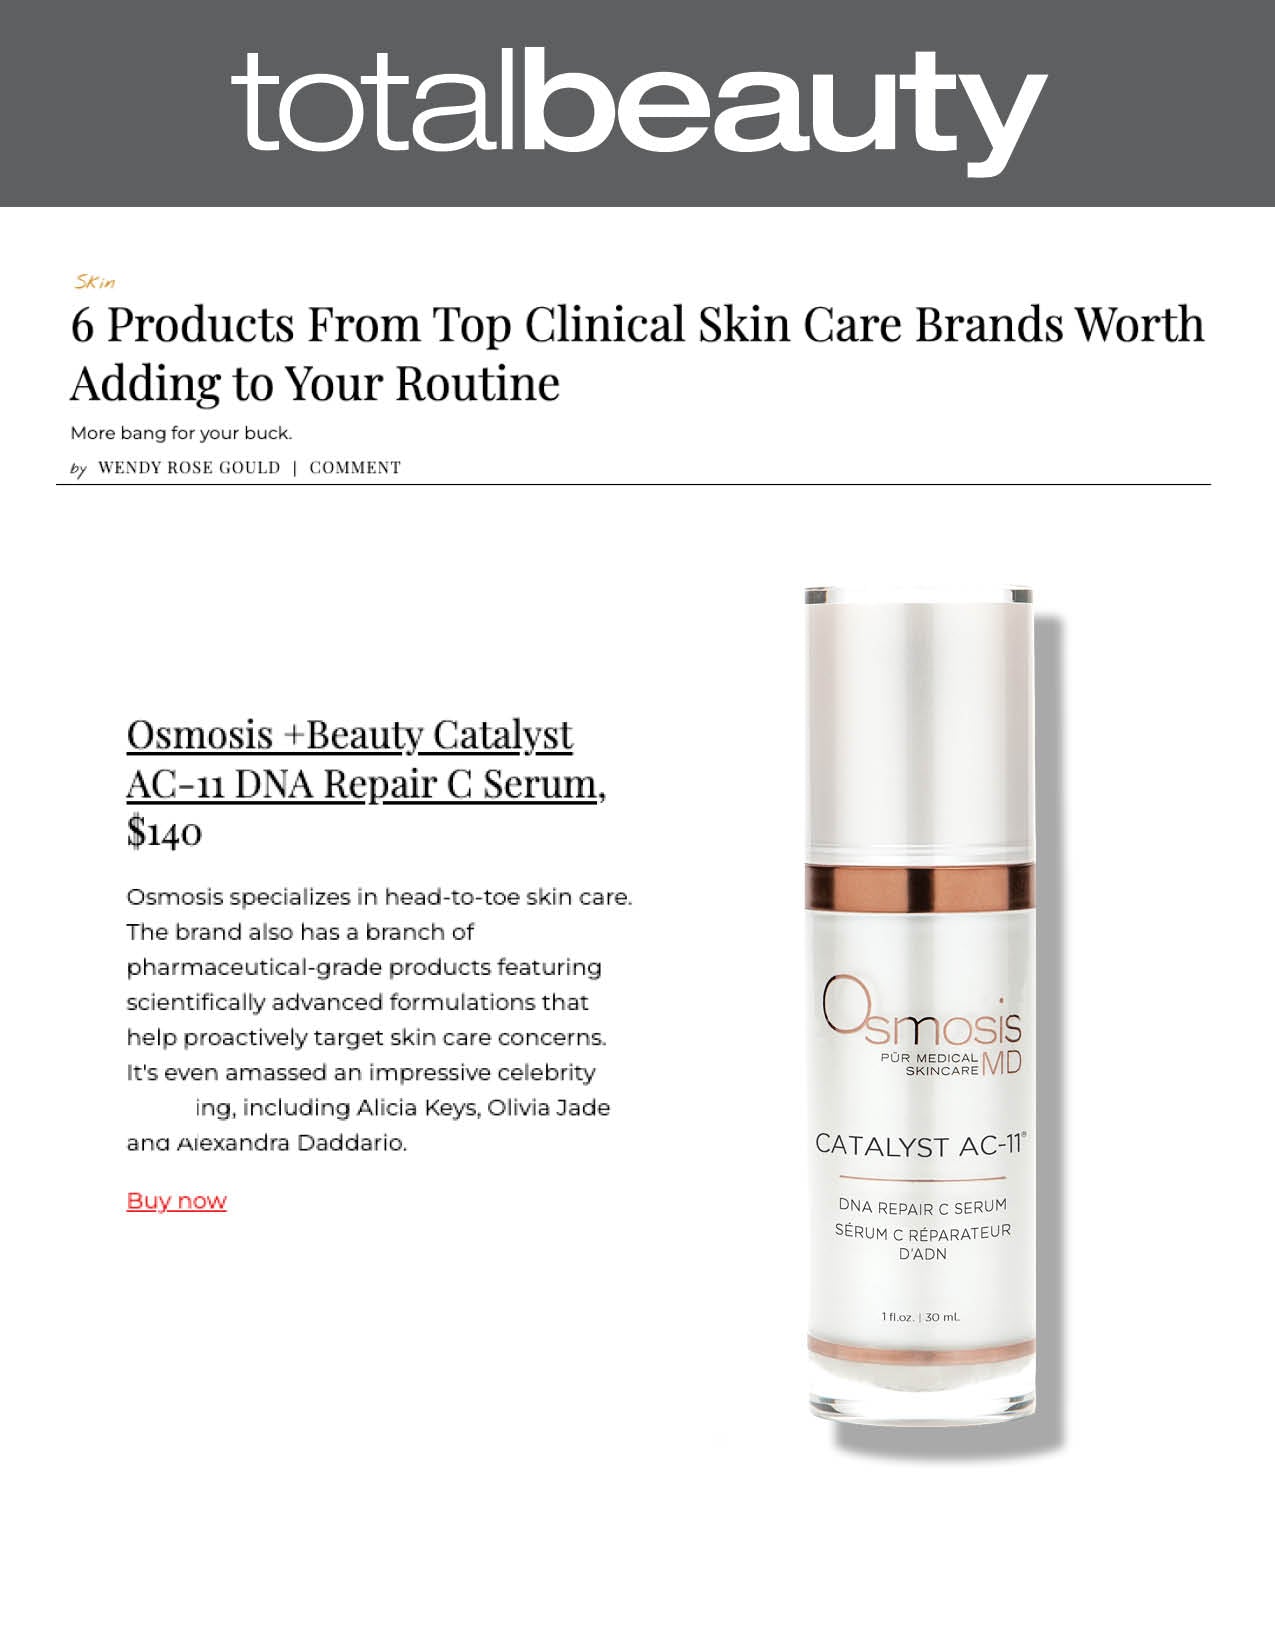 Catalyst was featured in a roundup on Total Beauty of clinical skincare brands